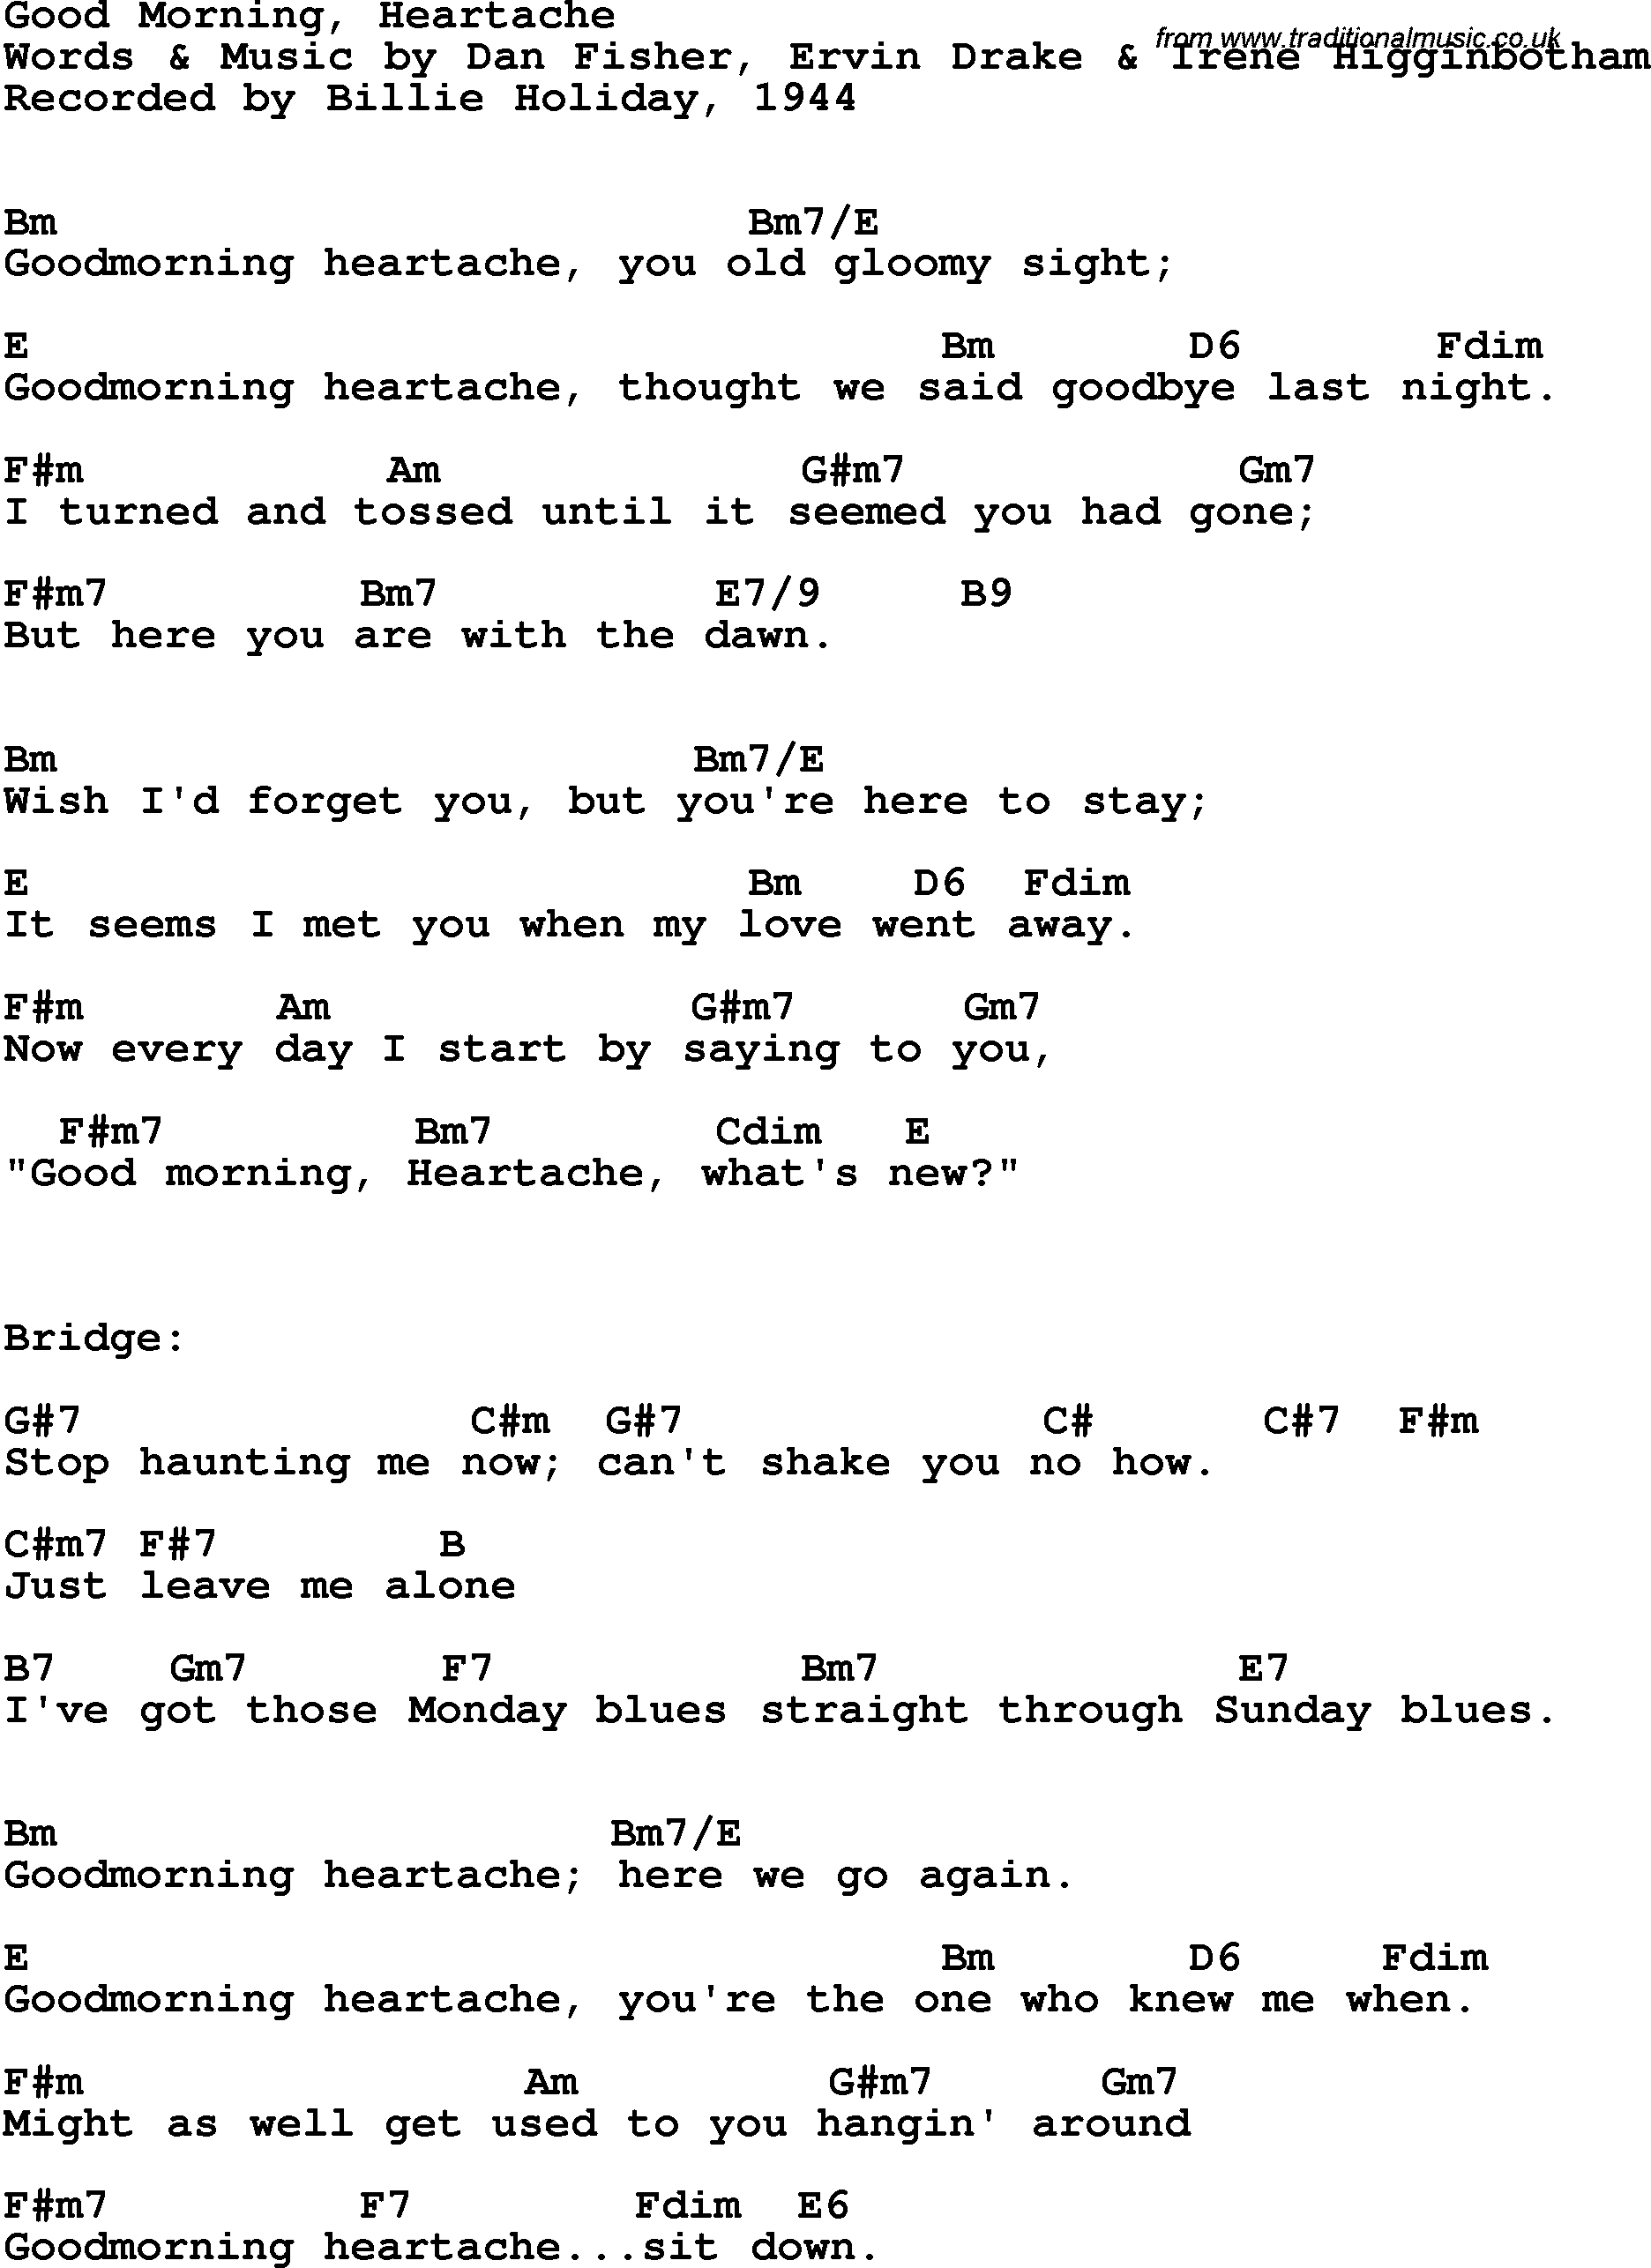 Sunday Morning Chords Song Lyrics With Guitar Chords For Good Morning Heartache Billie